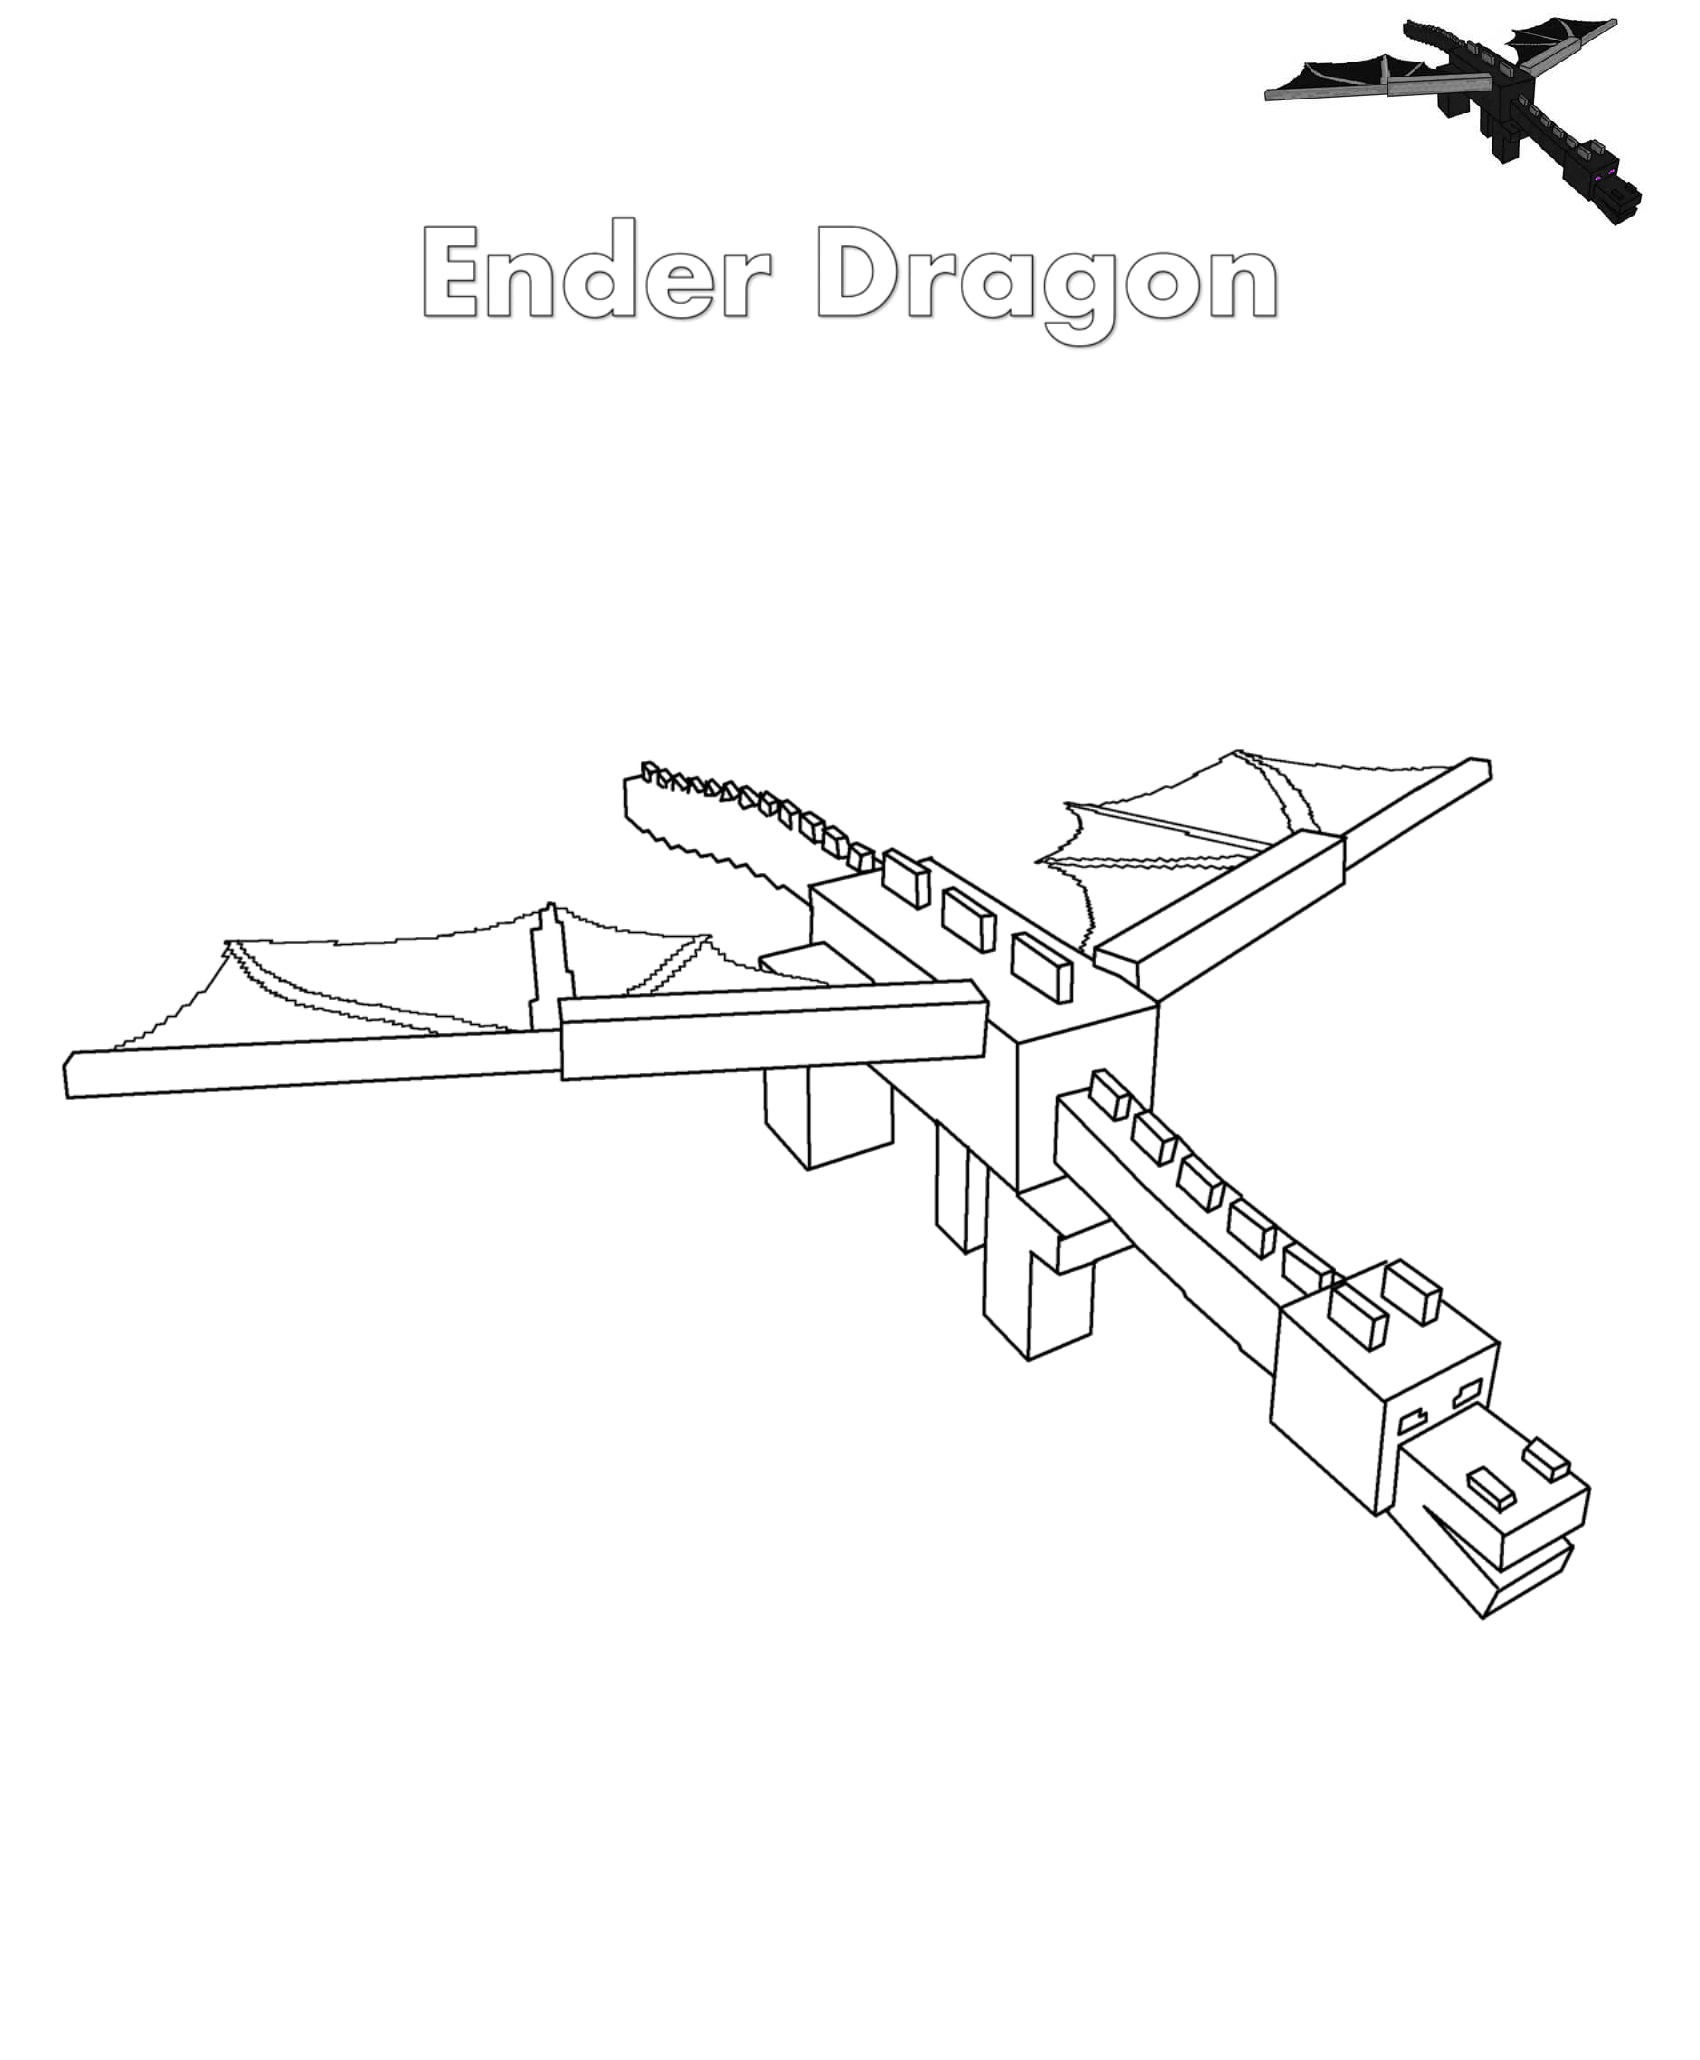 ender dragon minecraft coloring pages coloring cool